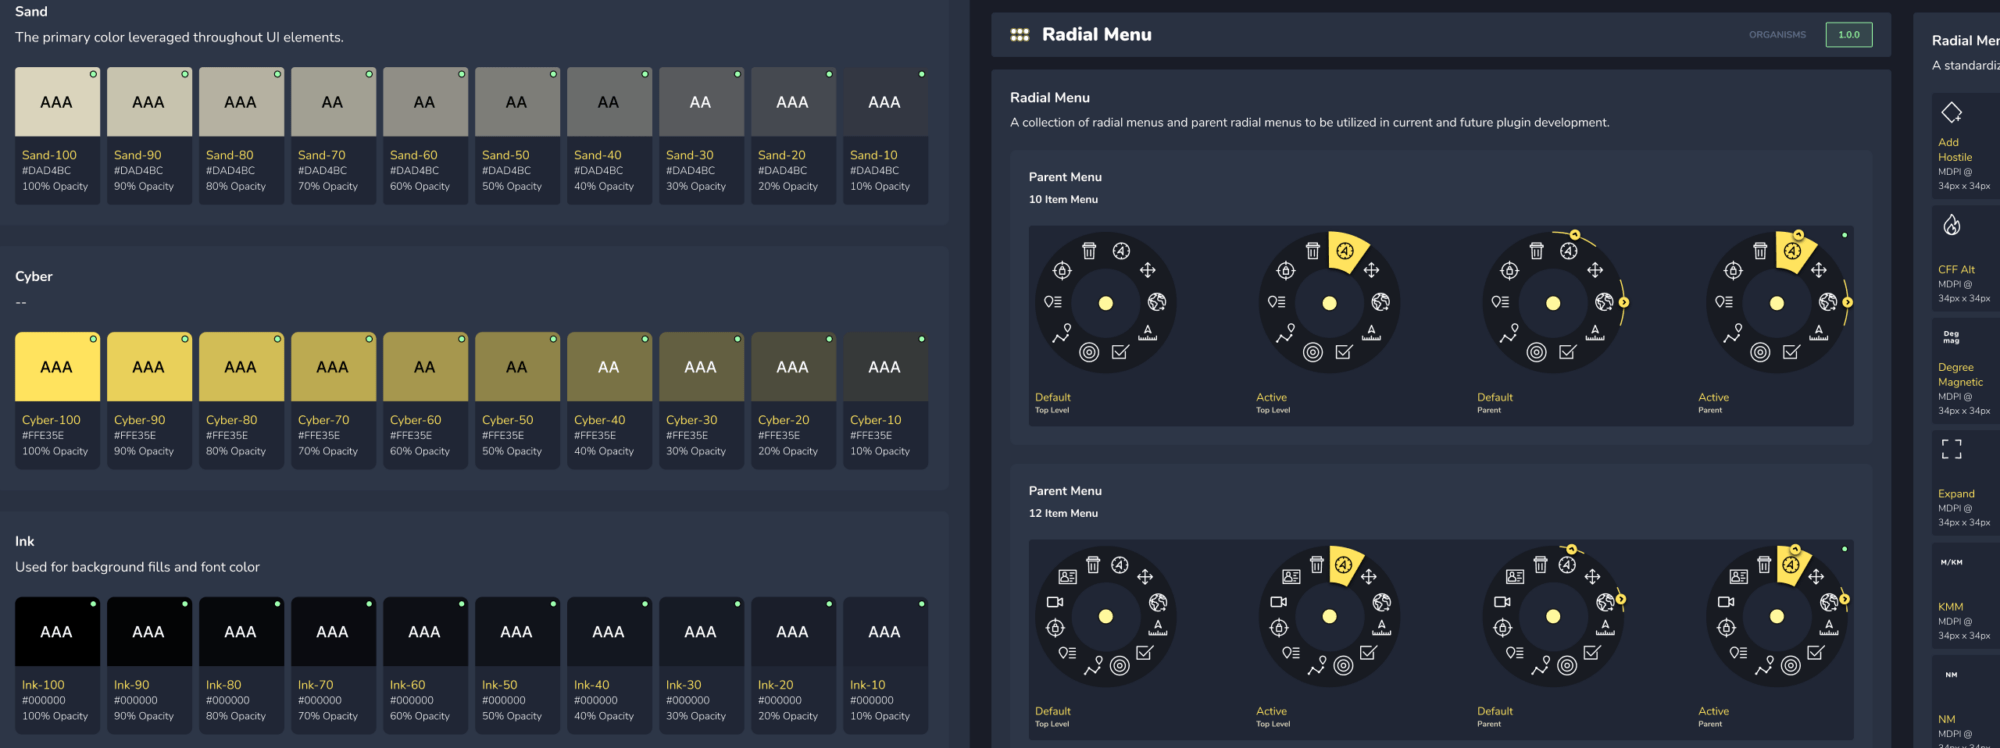 A snapshot of the complex UI design system.